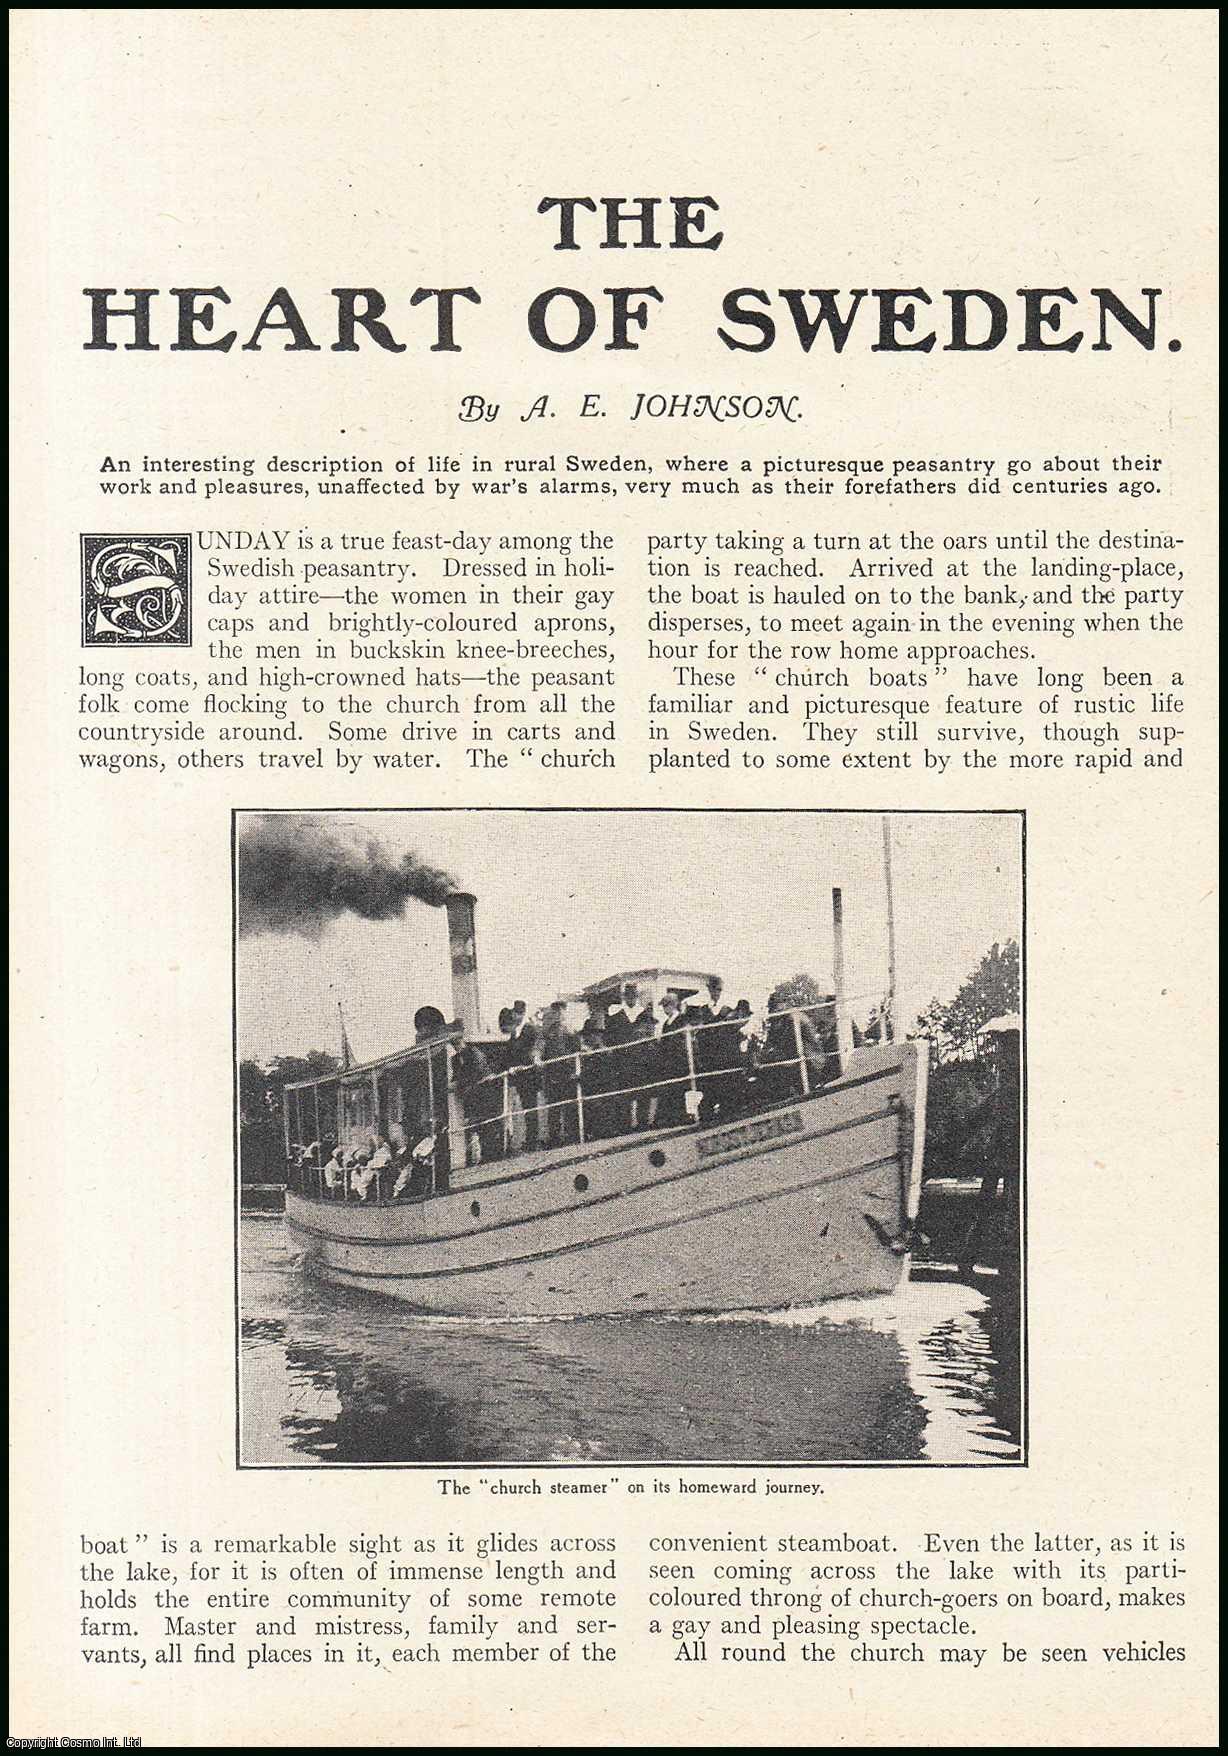 A.E. Johnson - The Heart of Sweden : life in rural Sweden. An uncommon original article from the Wide World Magazine, 1916.